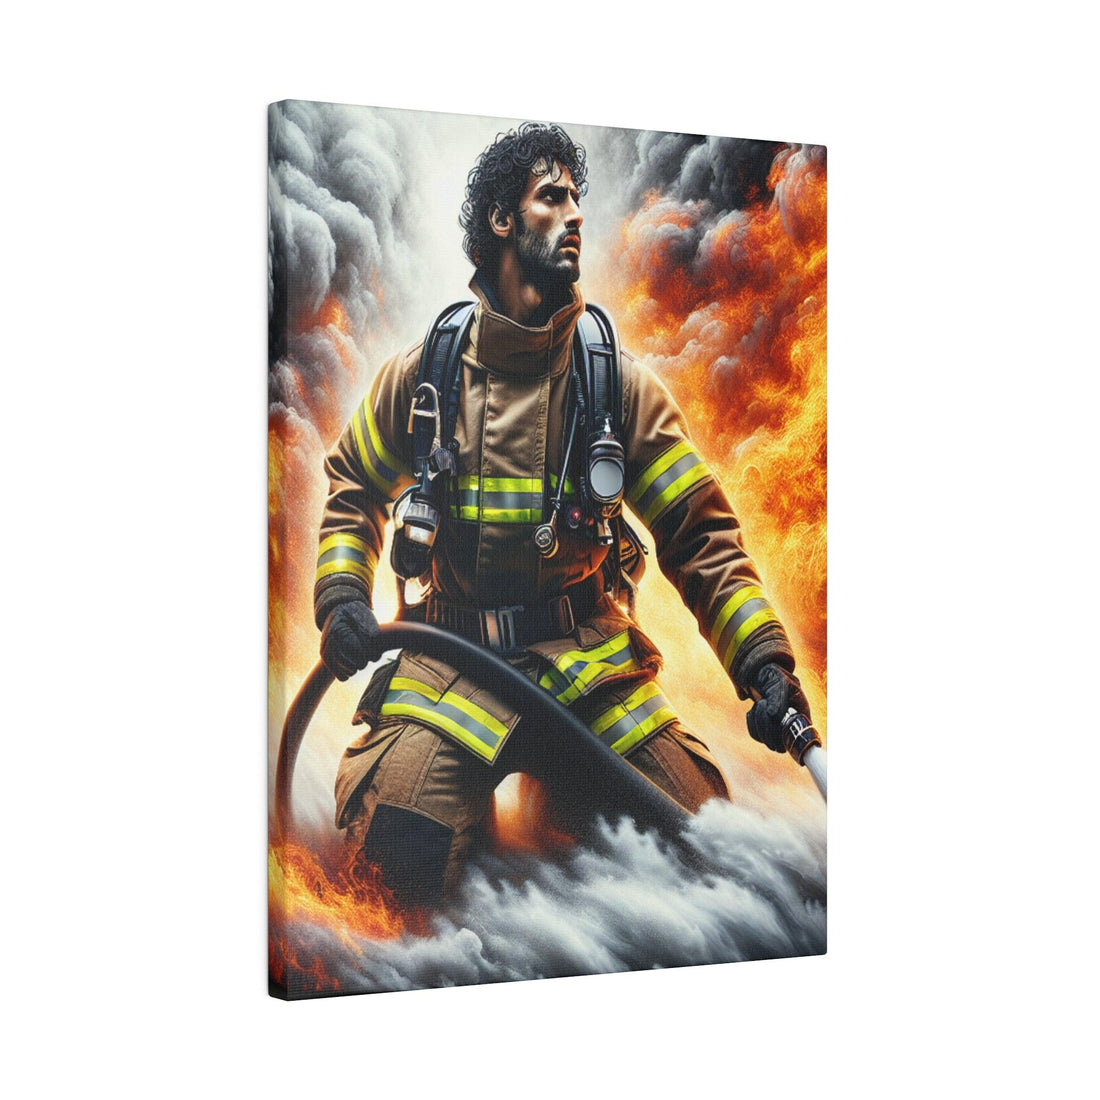 "Blaze of Courage: Firefighter Tribute Canvas Wall Art" - Canvas - The Alice Gallery